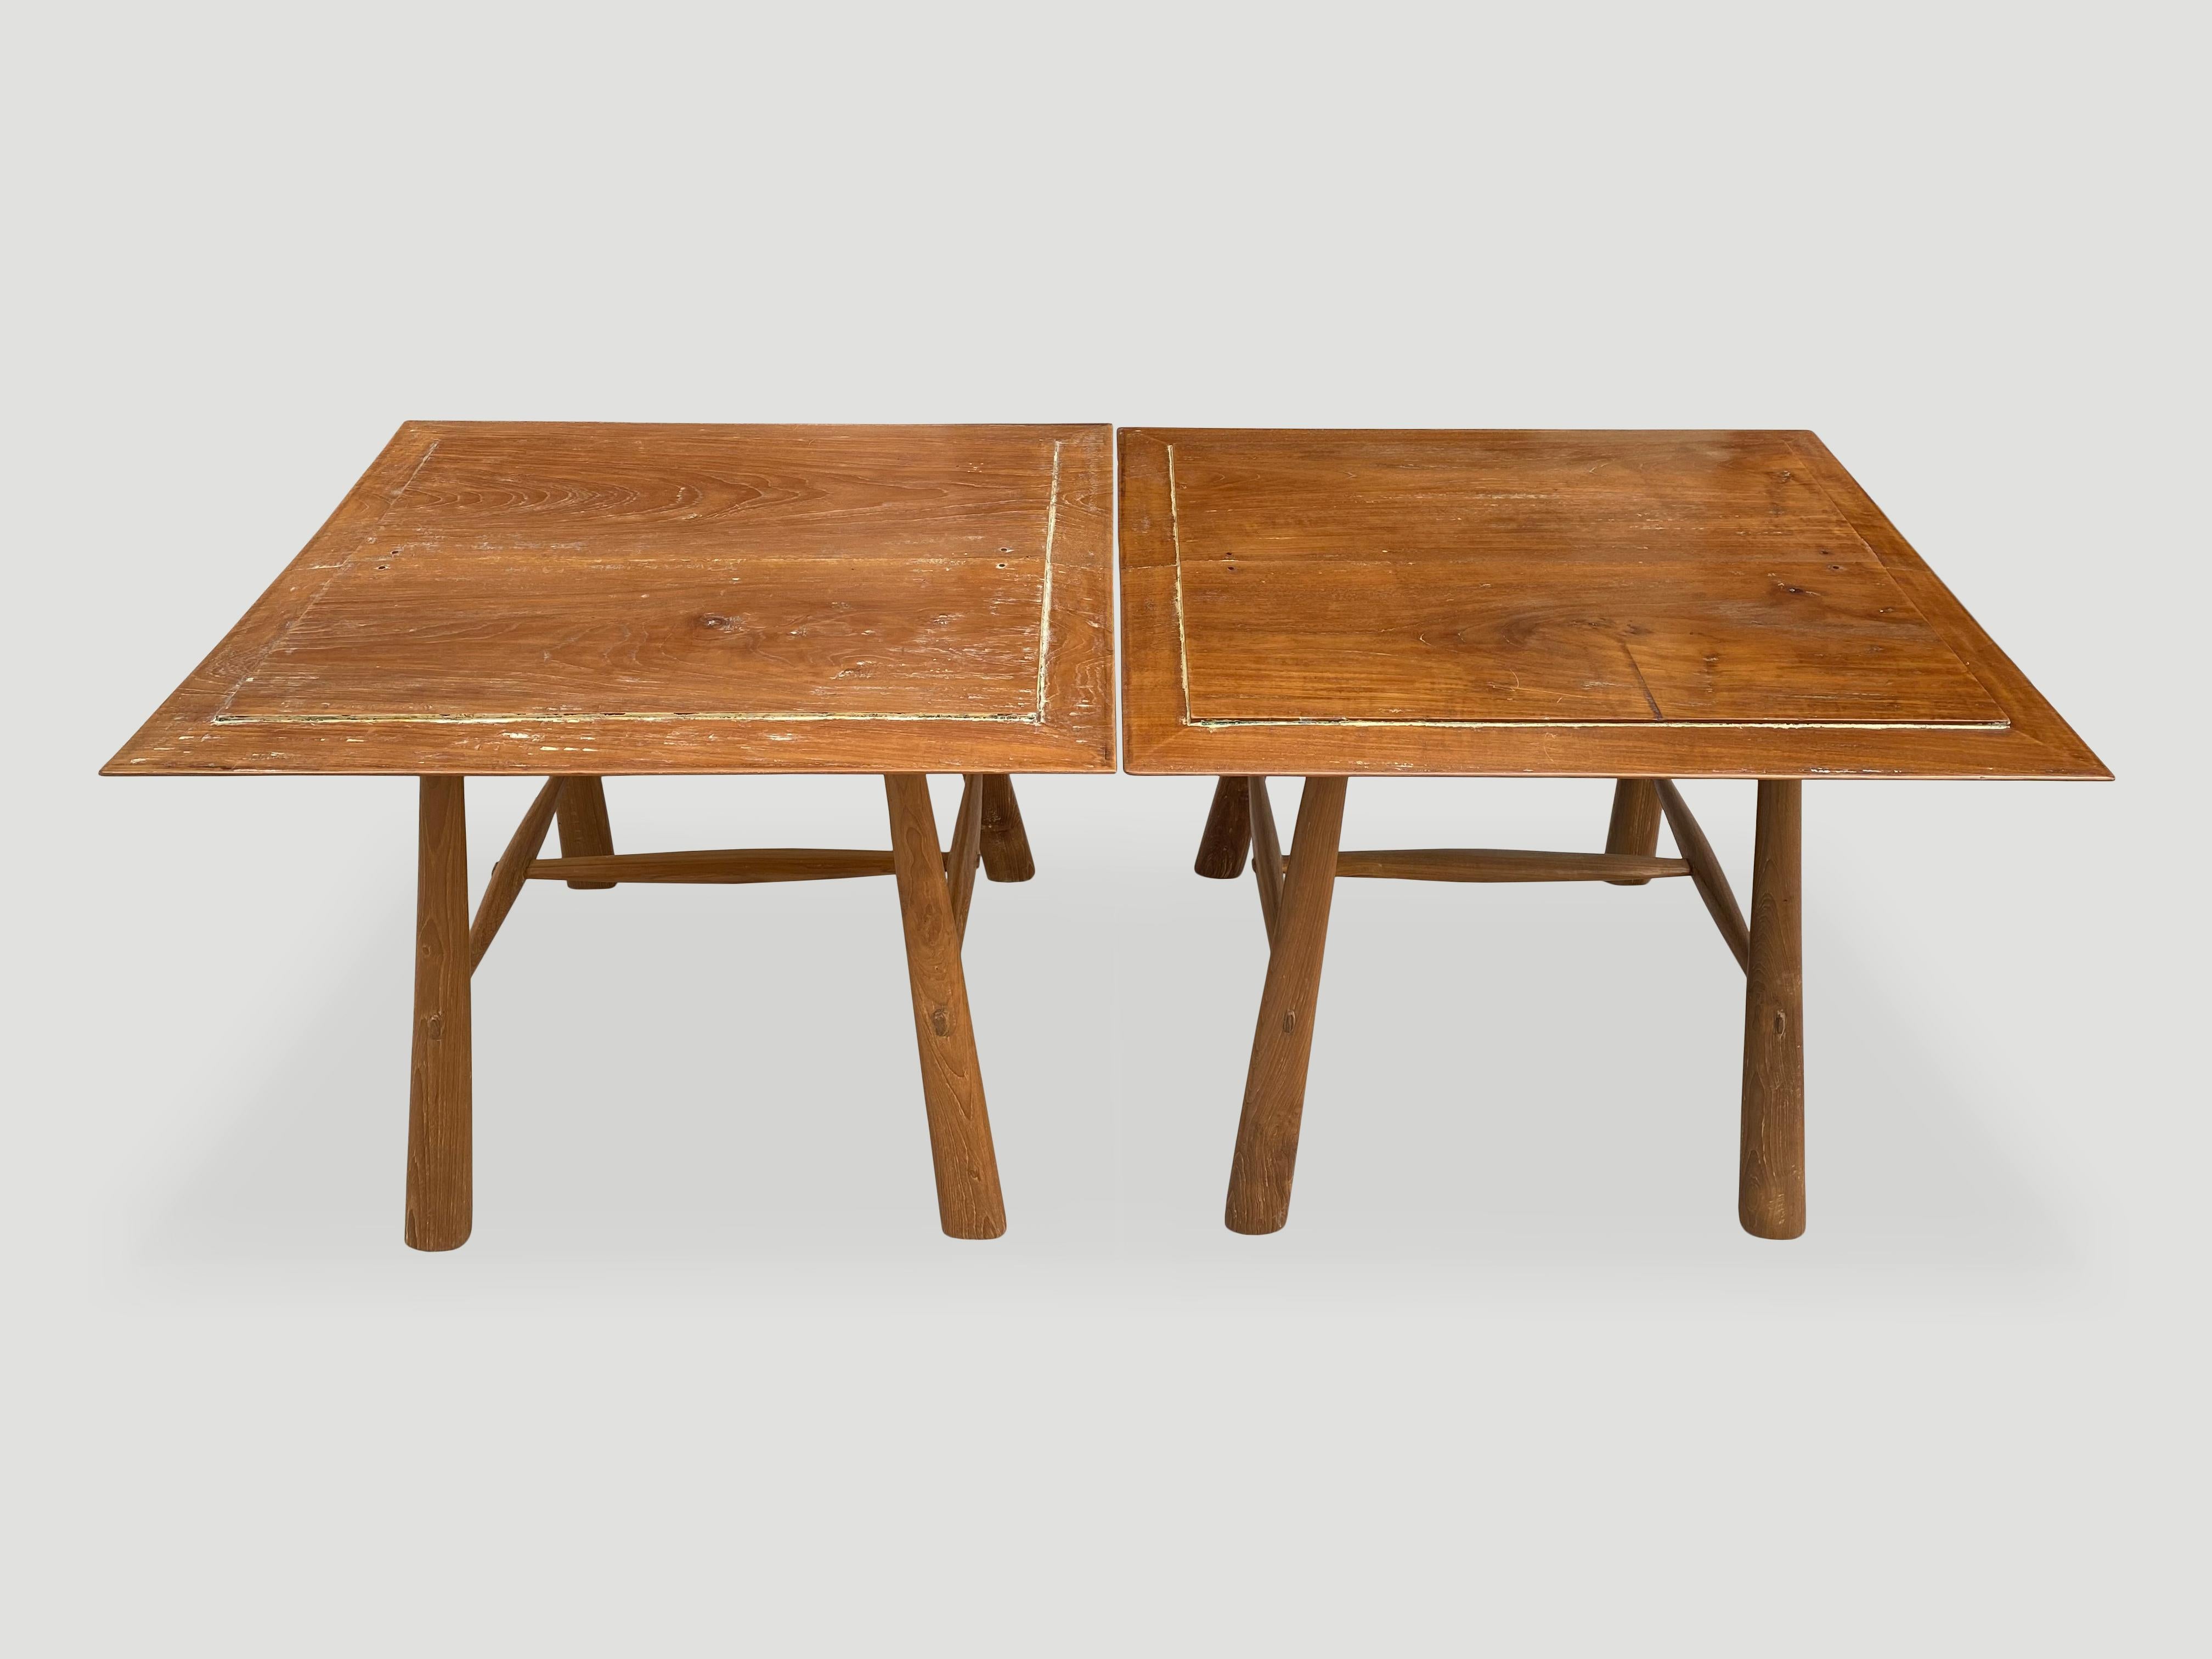 Andrianna Shamaris Midcentury Couture Teak Wood Cocktail Table or Entry Table For Sale 4